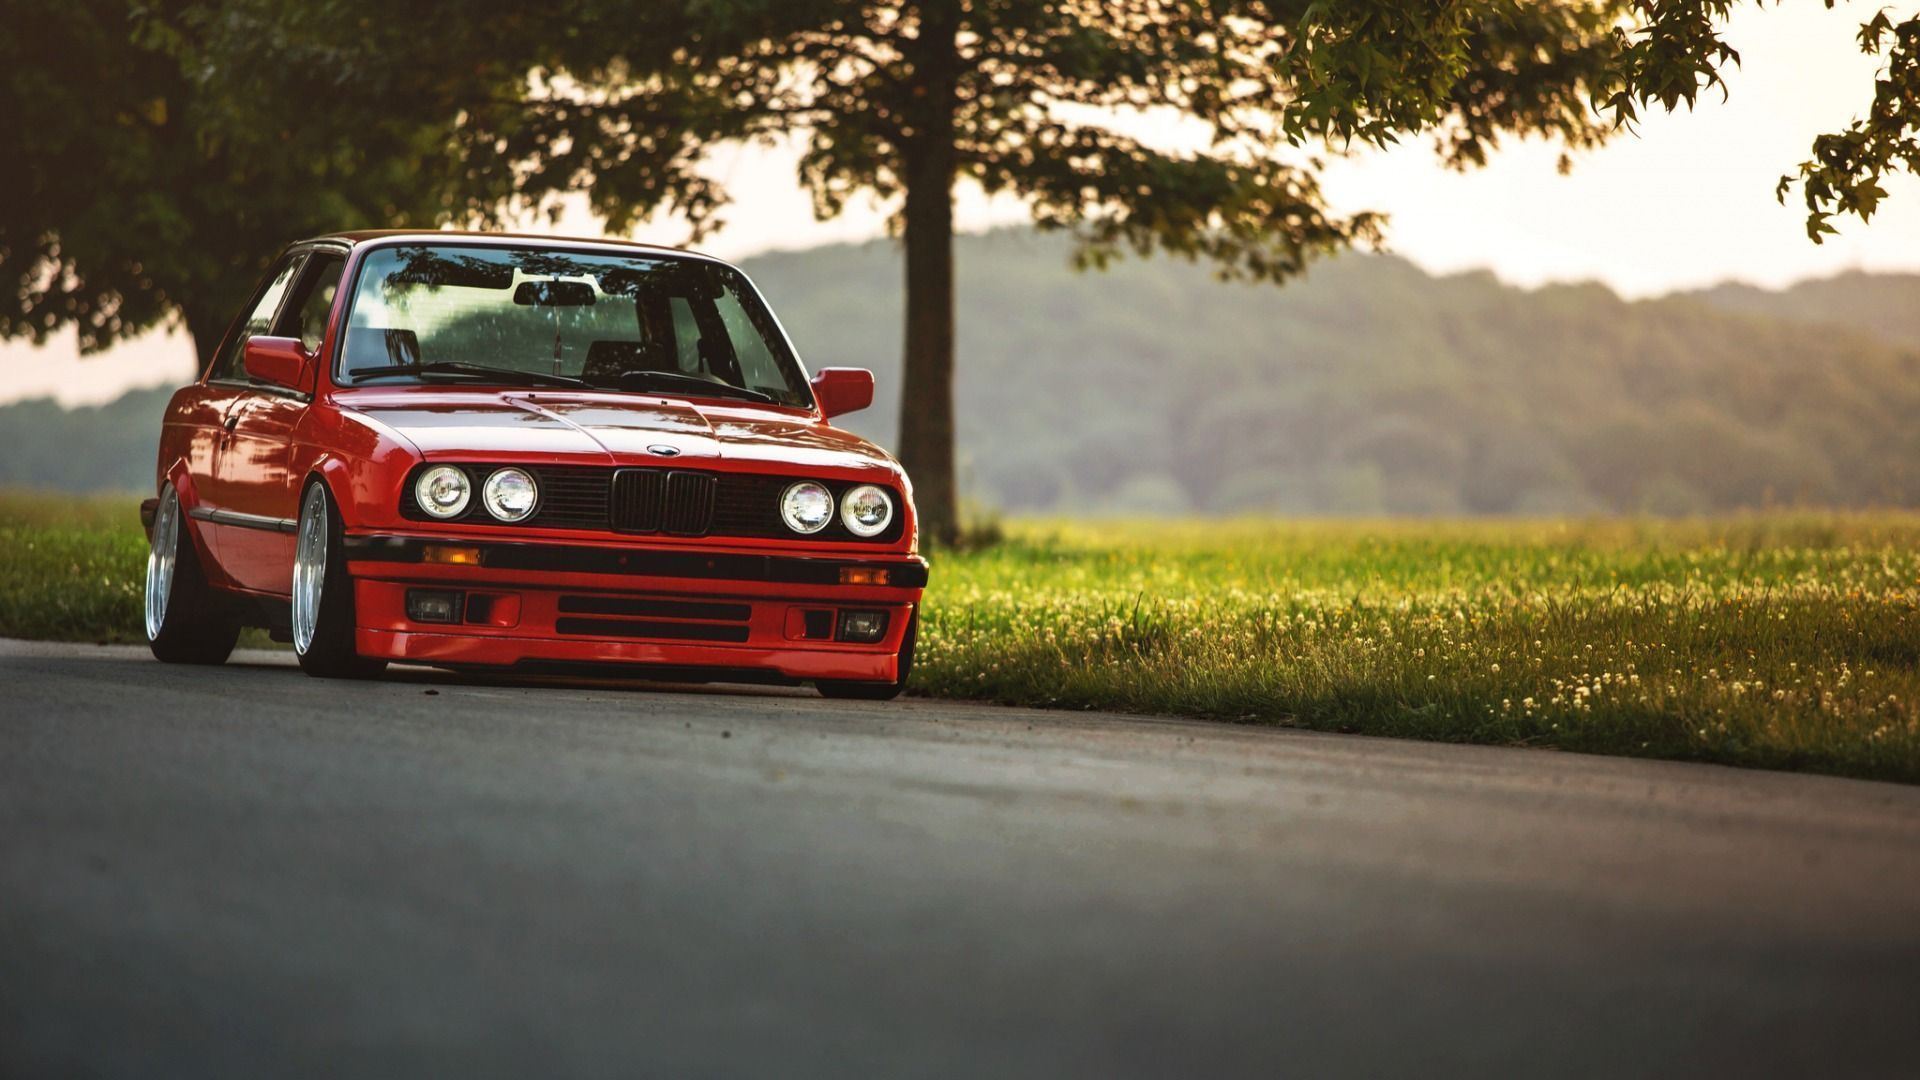 Download wallpaper bmw, e30, red, tuning, bmw, red, tuning, bmw